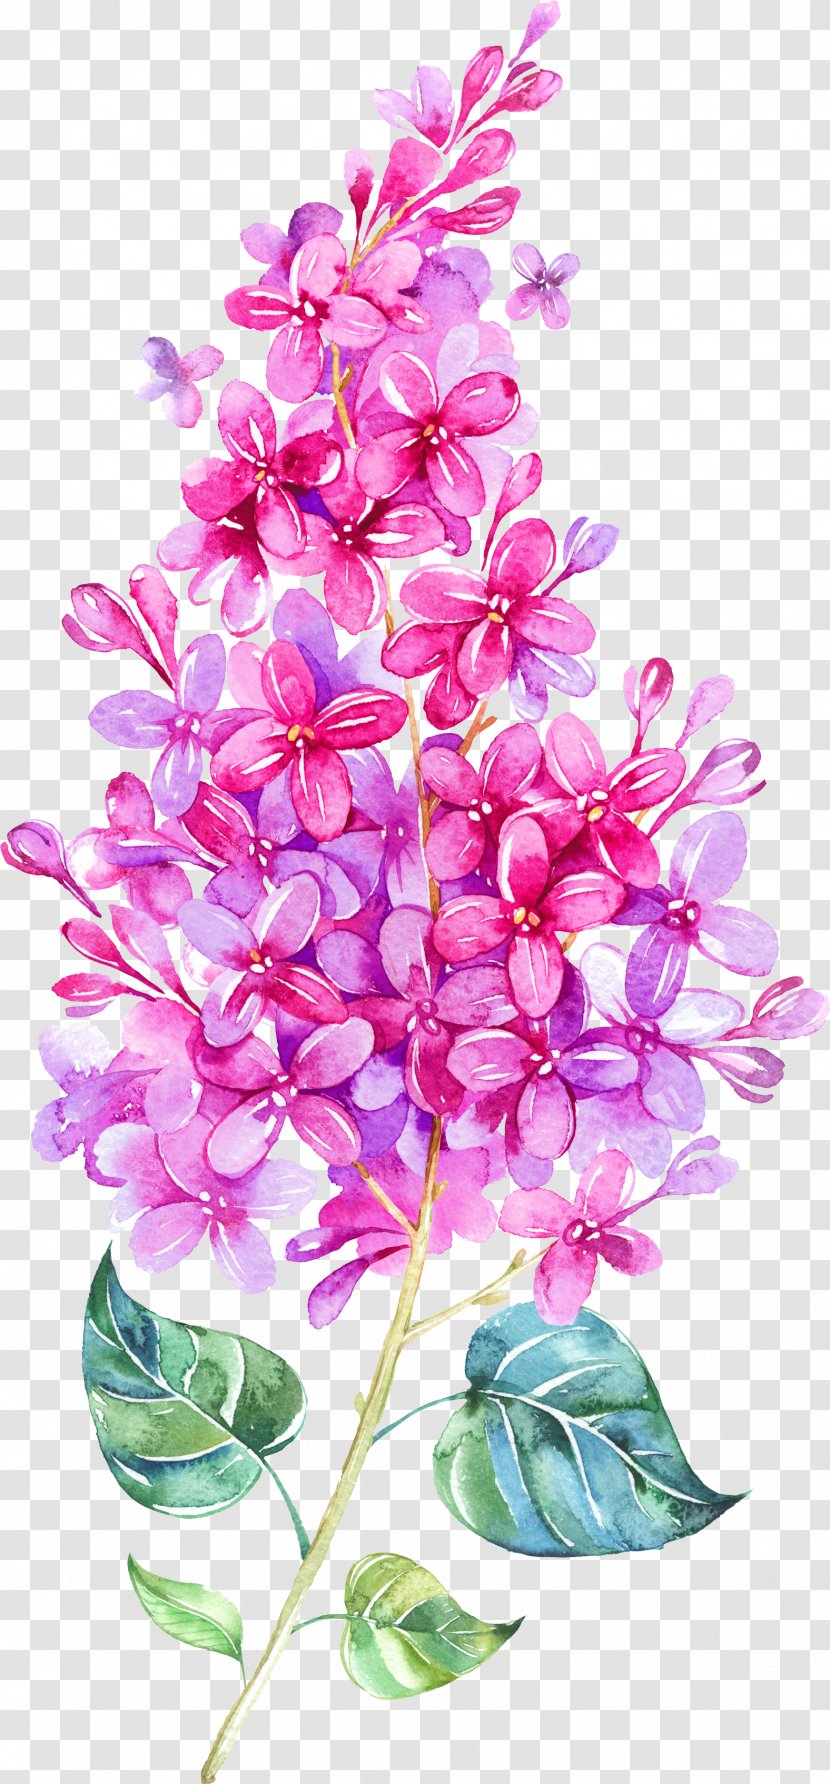 IPhone 6 Watercolor Painting Lilac Clip Art - Plant Stem - Floating Flower Transparent PNG